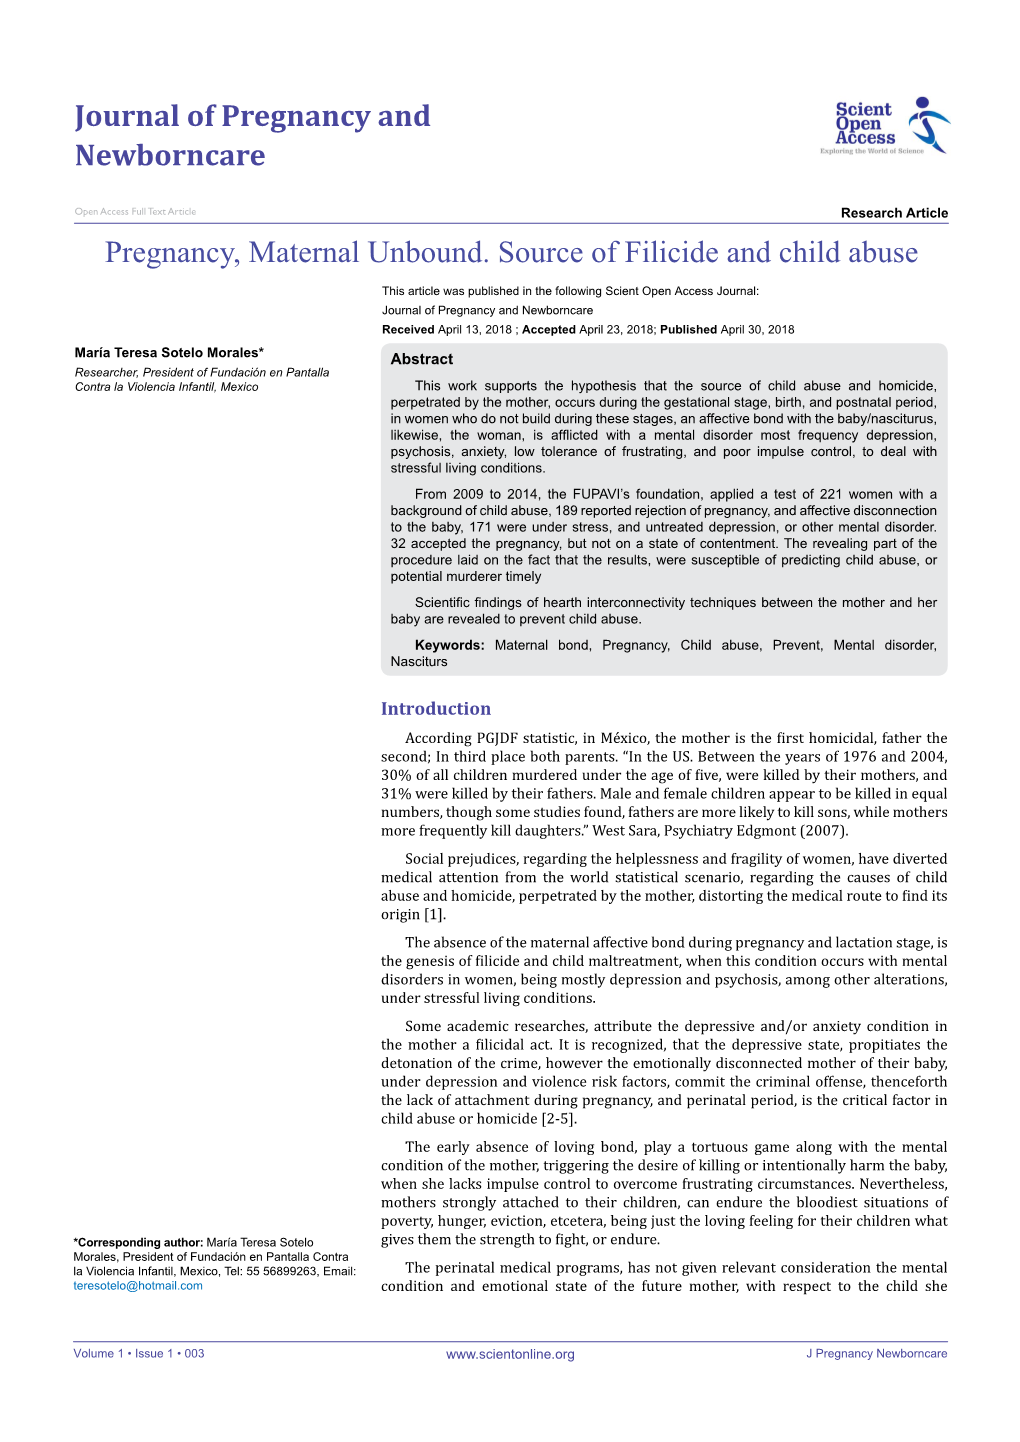 Pregnancy, Maternal Unbound. Source of Filicide and Child Abuse